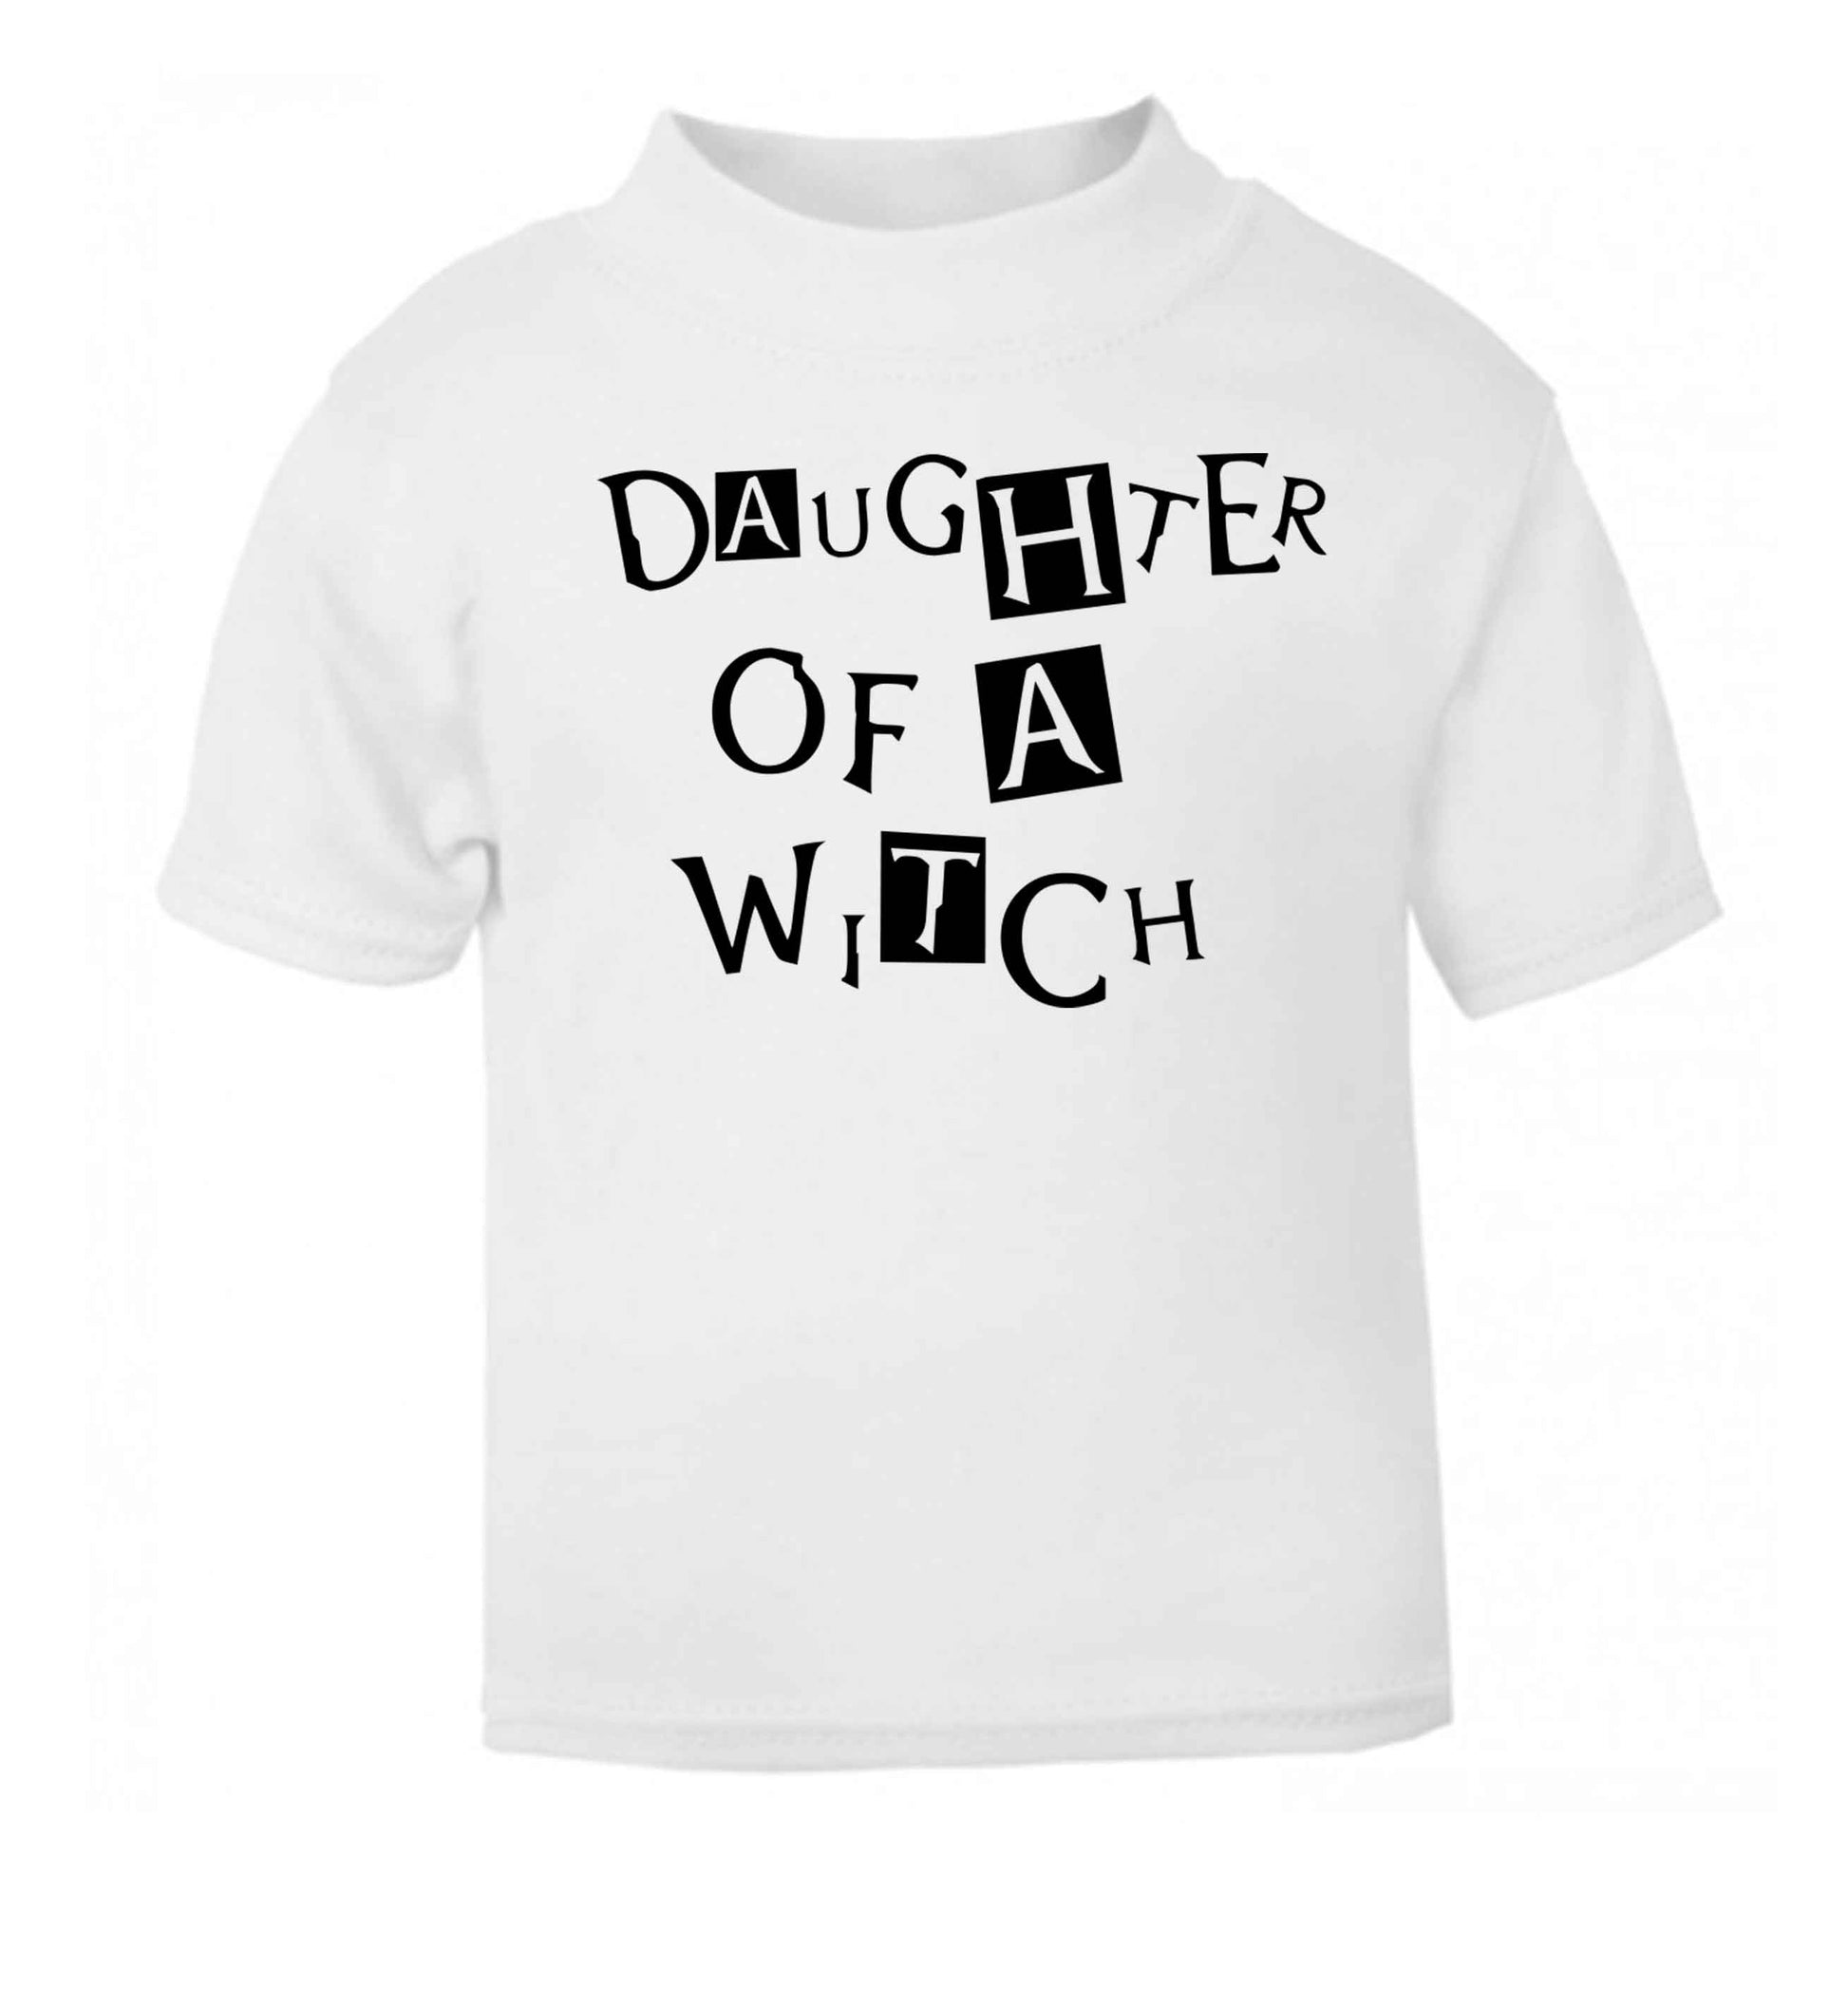 Daughter of a witch white baby toddler Tshirt 2 Years